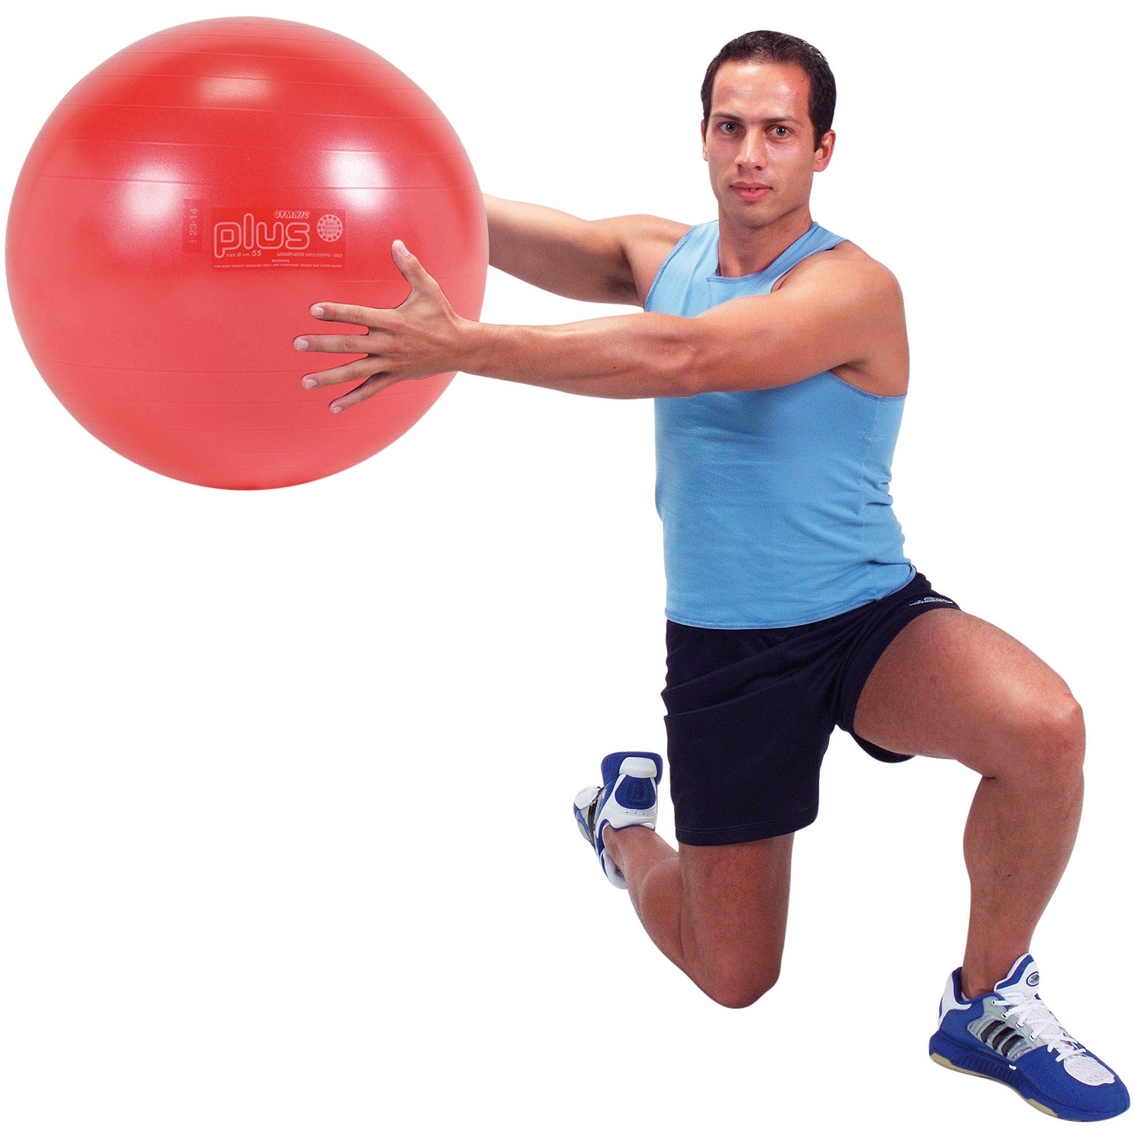 Kettler Gymnic Classic Plus Ball - Image 2 of 2